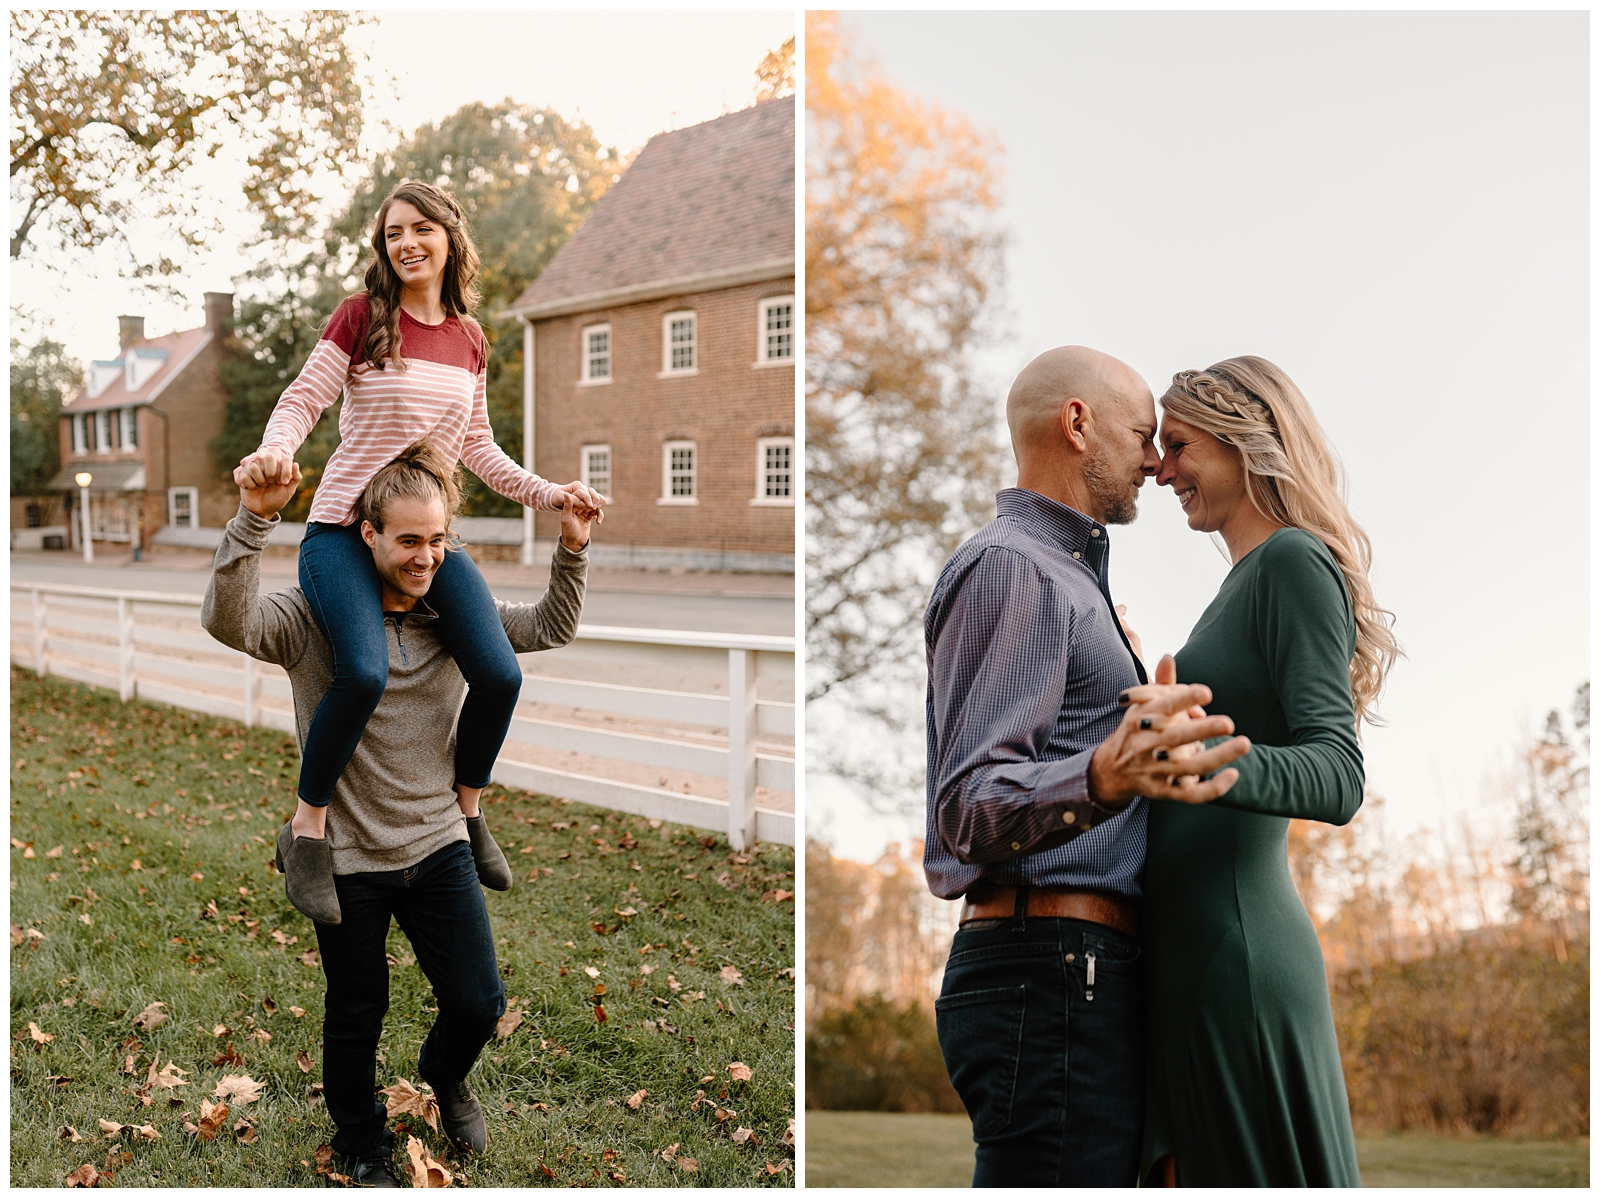 Local engagement session locations